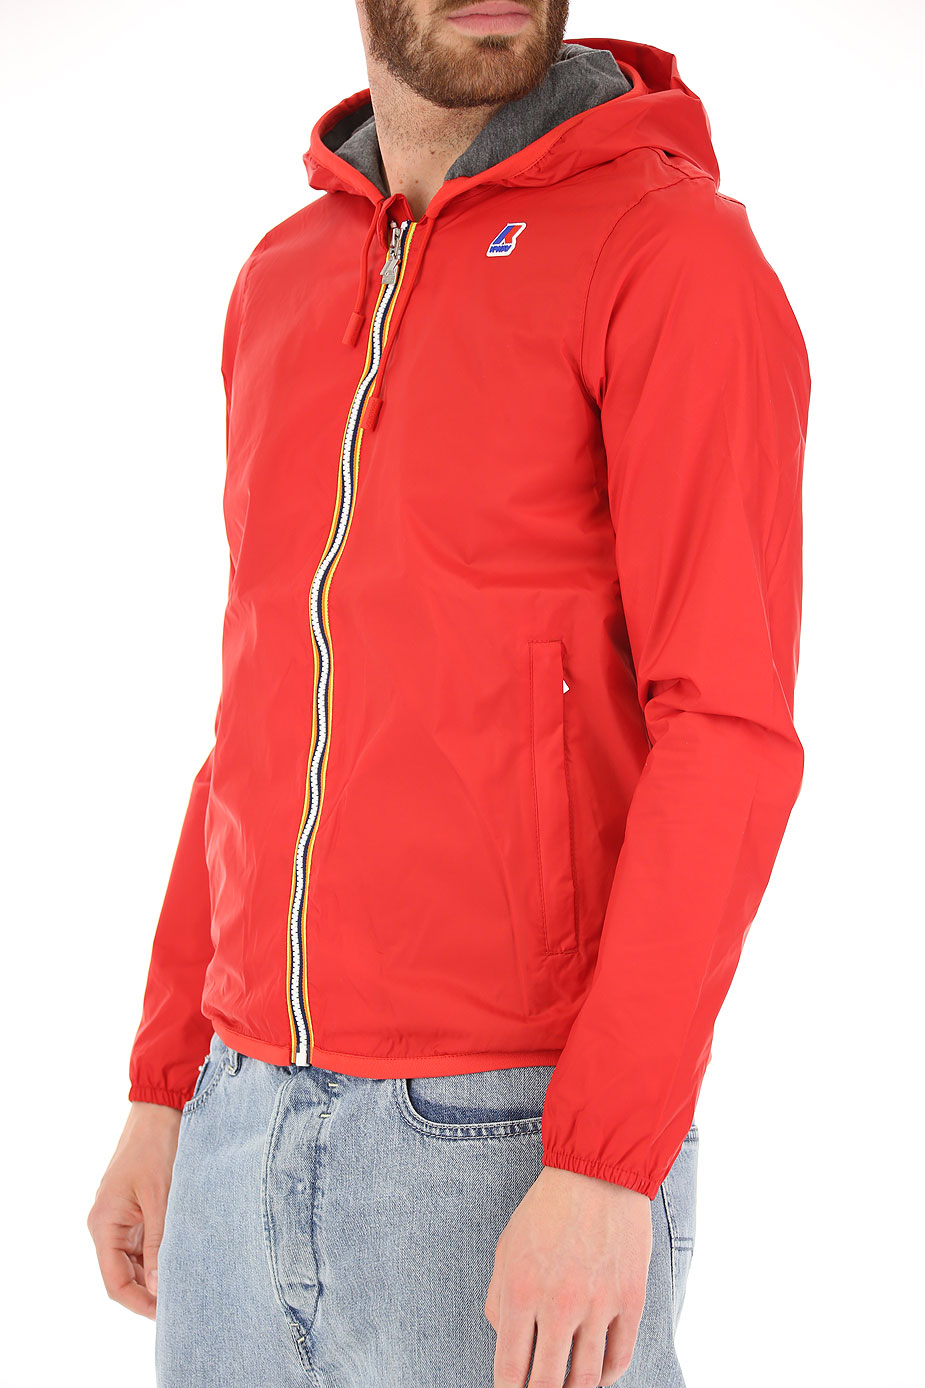 Mens Clothing K-Way, Style code: k009fn0-red-